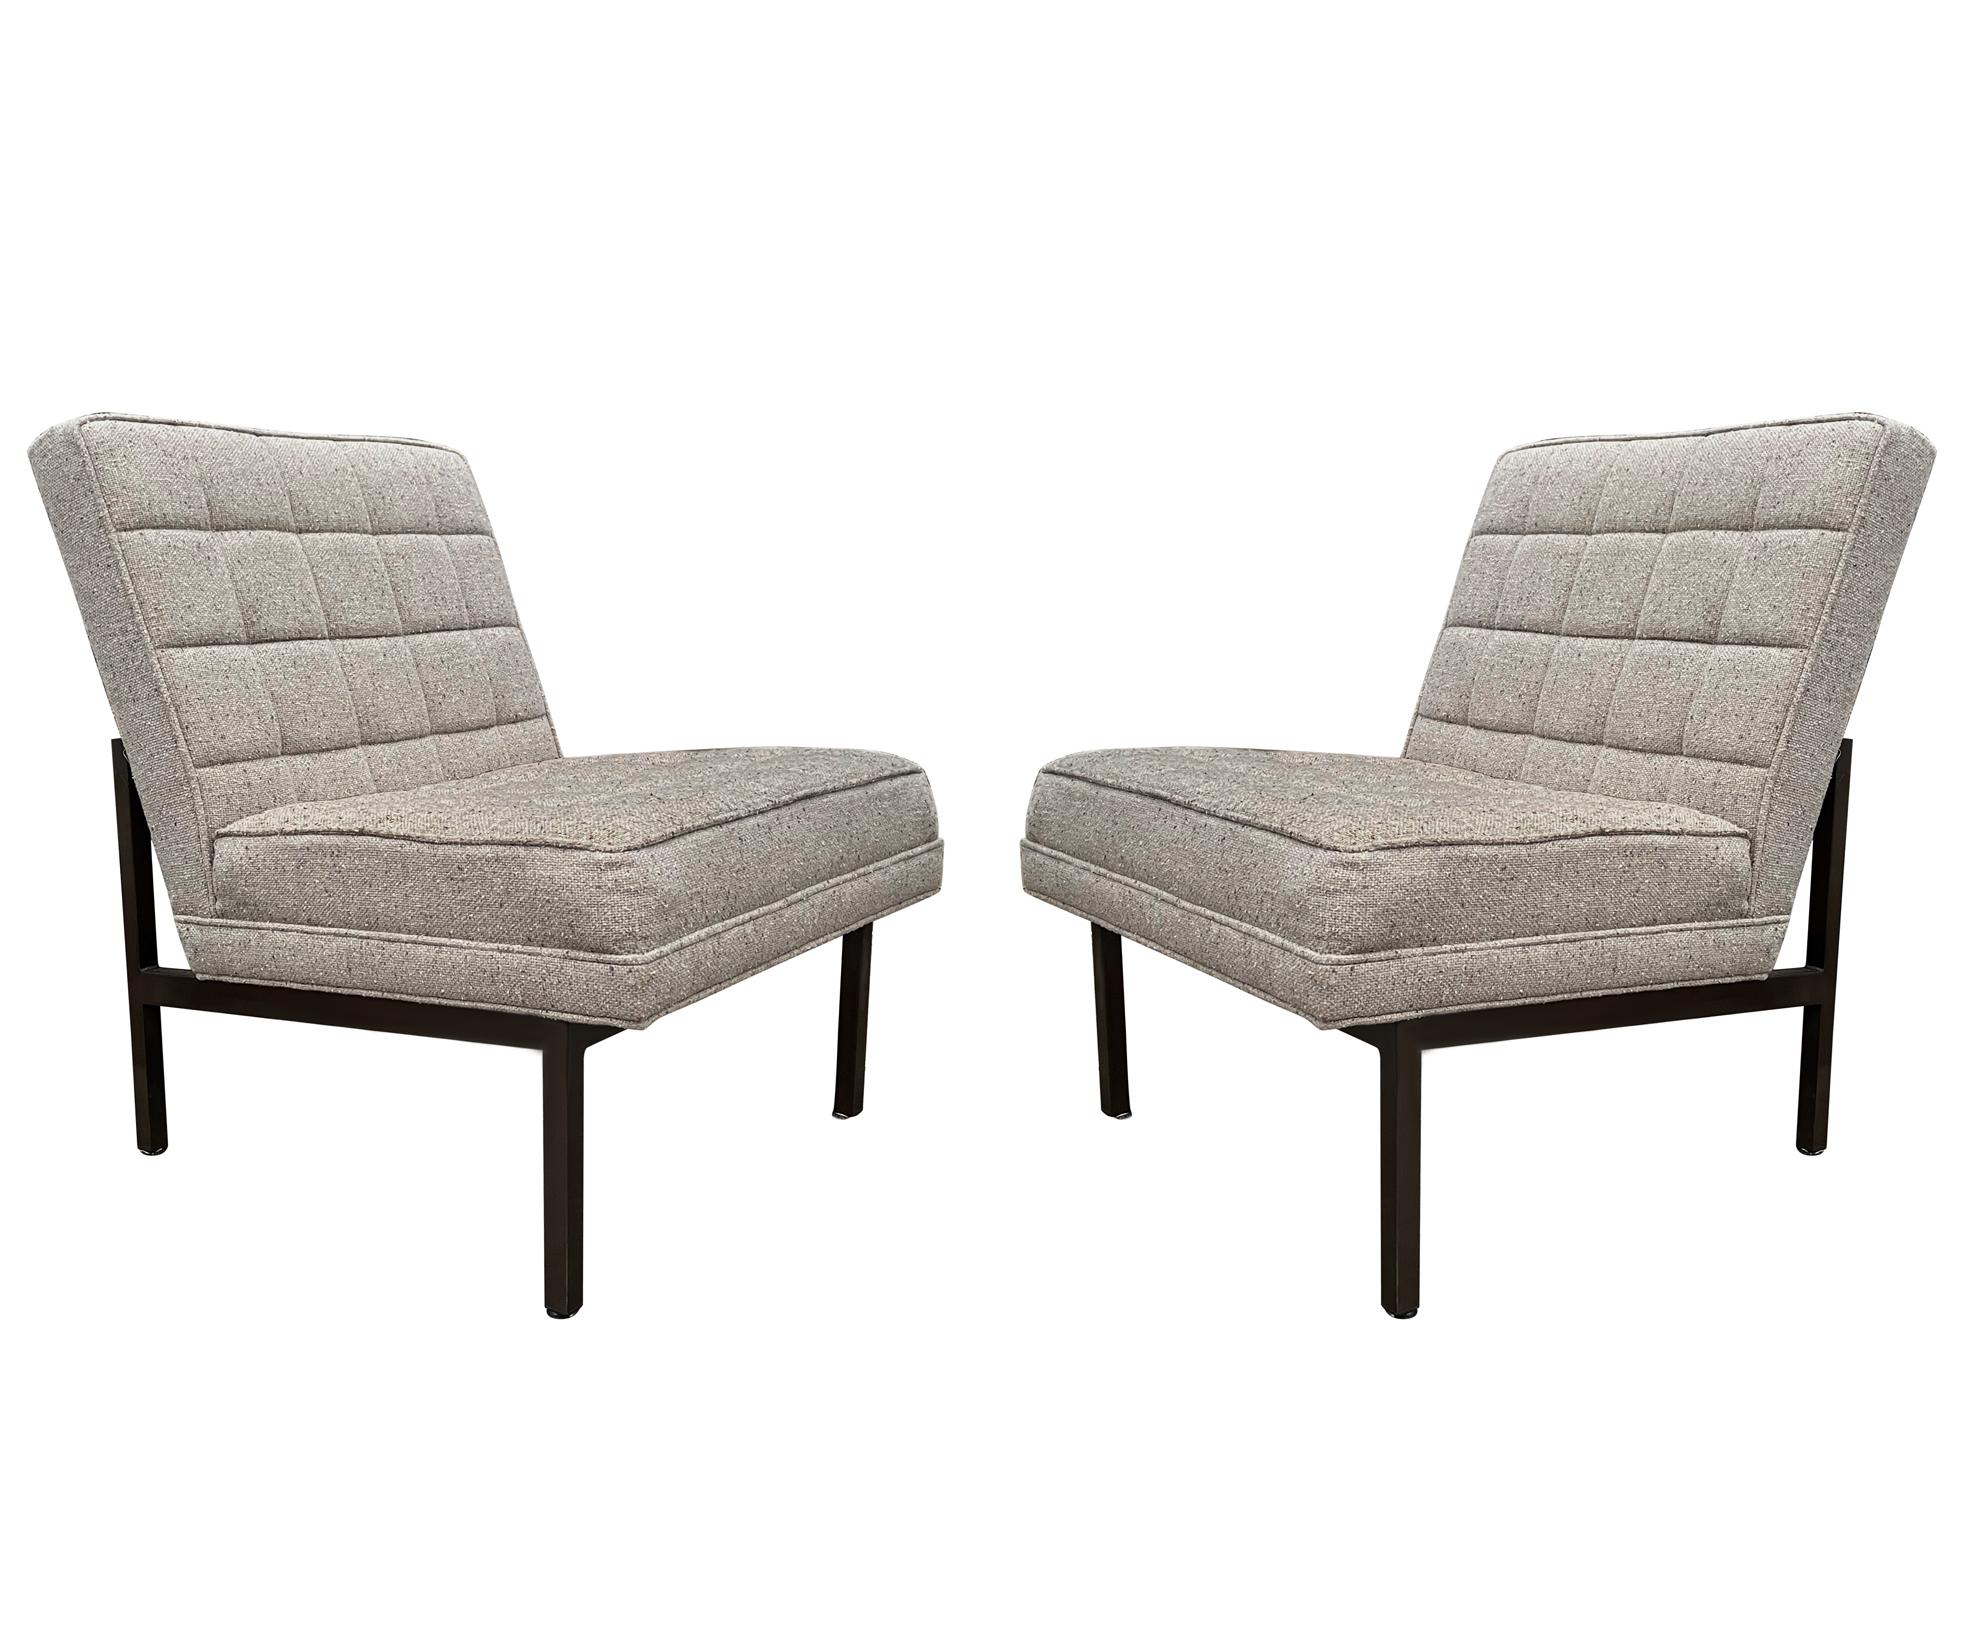 A simple and sleek modern pair of slipper chairs after Florence Knoll circa 1970's. These feature their original upholstery with bronze finished steel frames. Very usable as is.